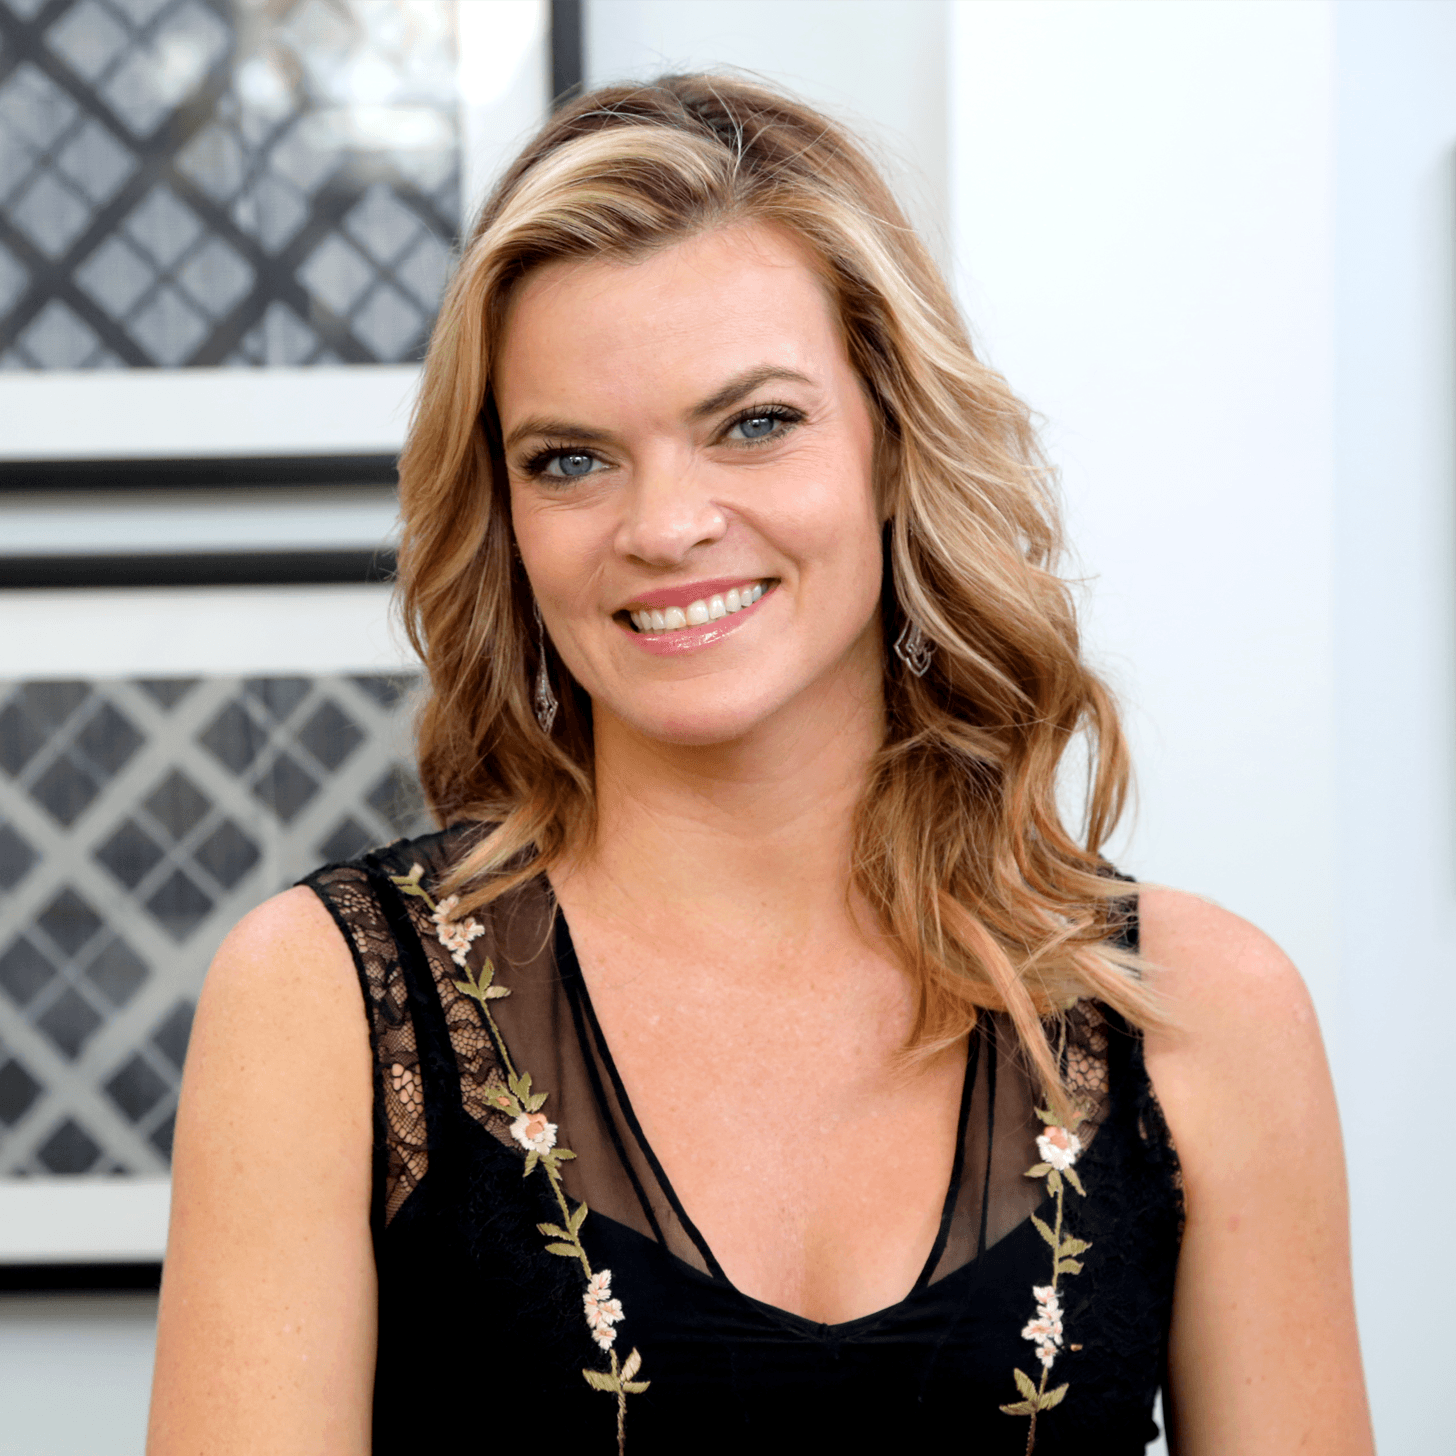 Pictures of Missi Pyle.